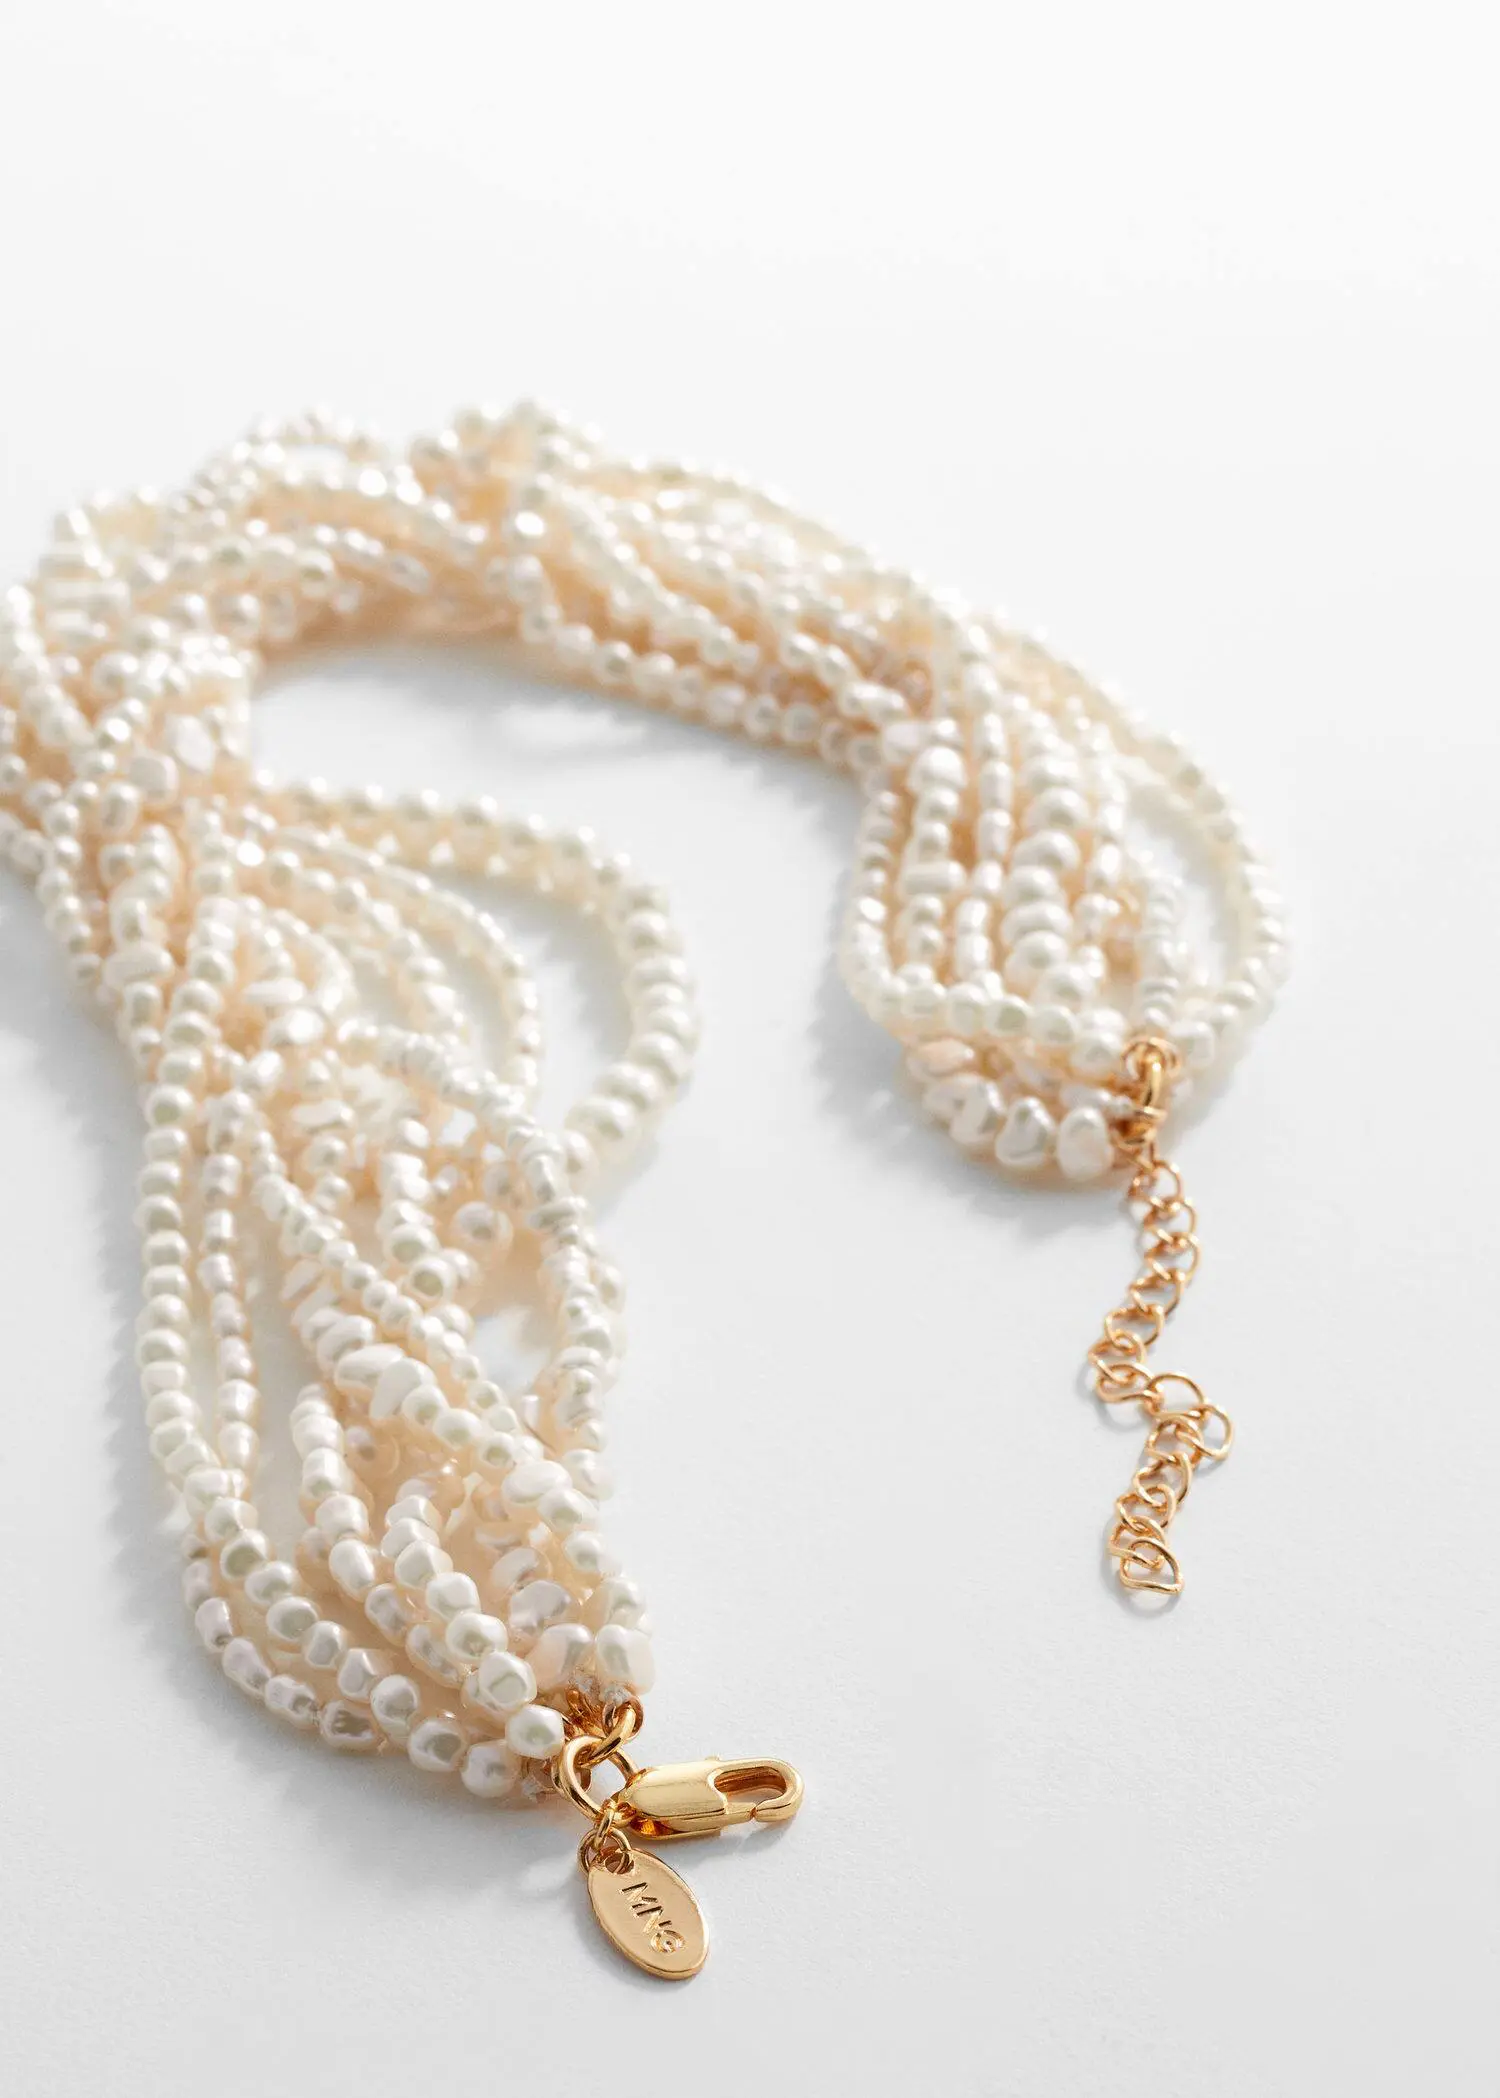 Mango Multiple-strand pearl necklace. 3